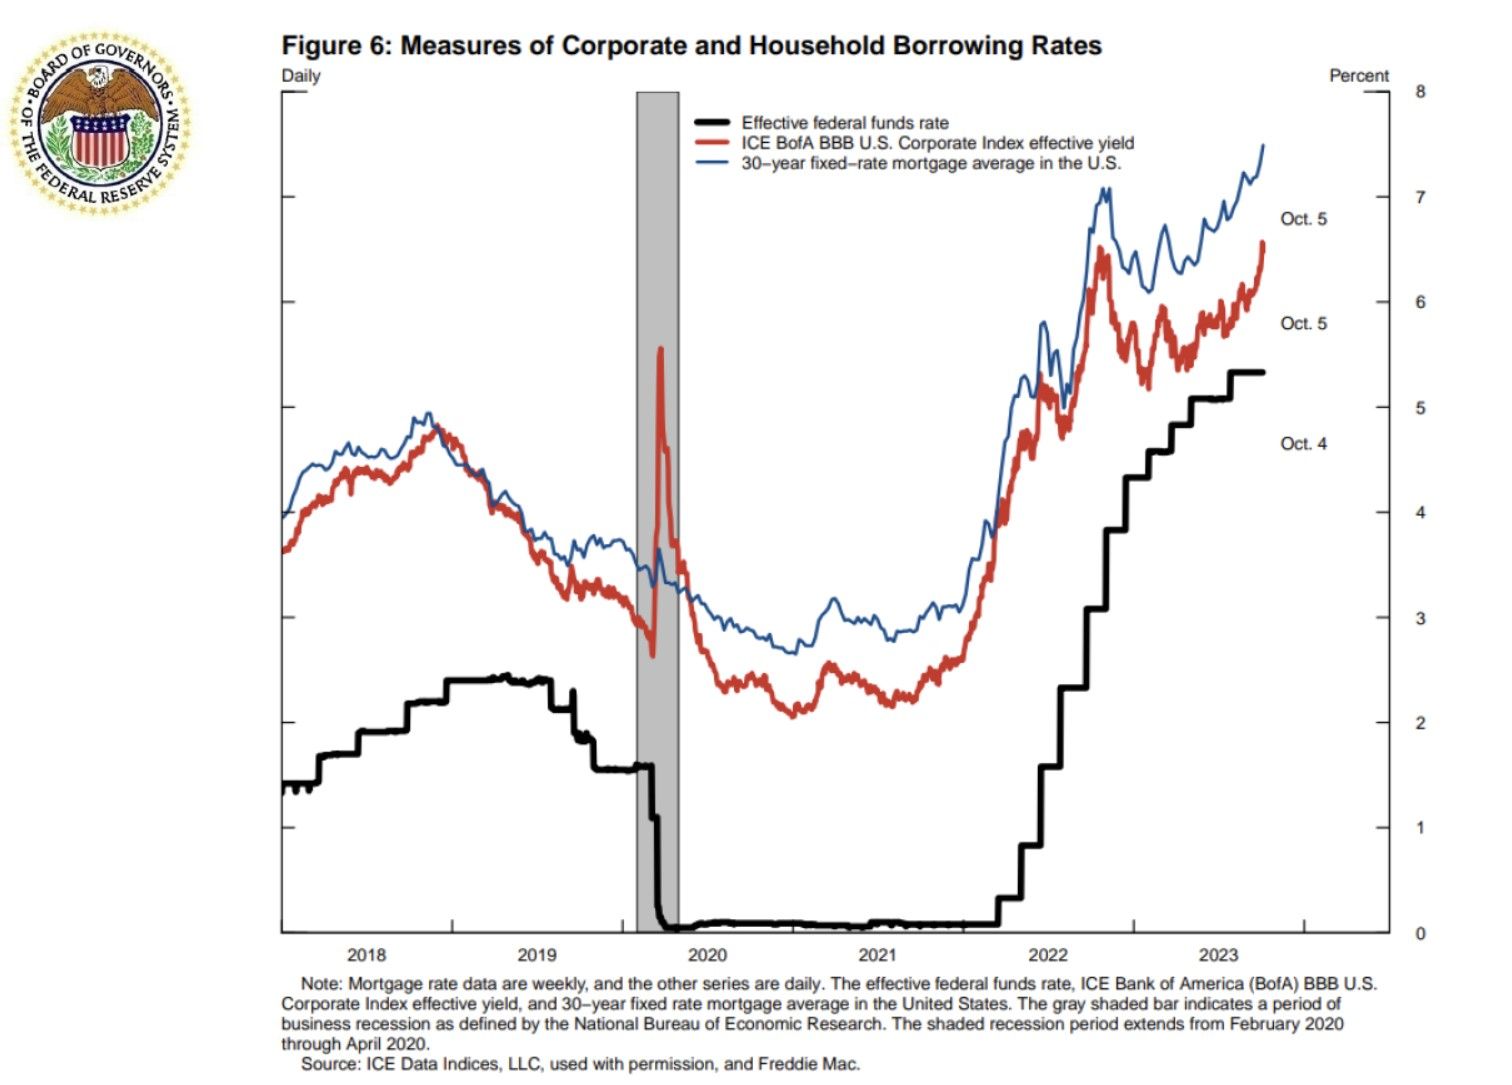 Figure 6 illustrates how long-term interest rates move in anticipation of changes in the federal funds rate. The red line is the average long-term triple-B corporate bond rate, a measure of corporate borrowing costs. The blue line is the average 30-year mortgage rate, a measure of household borrowing costs.